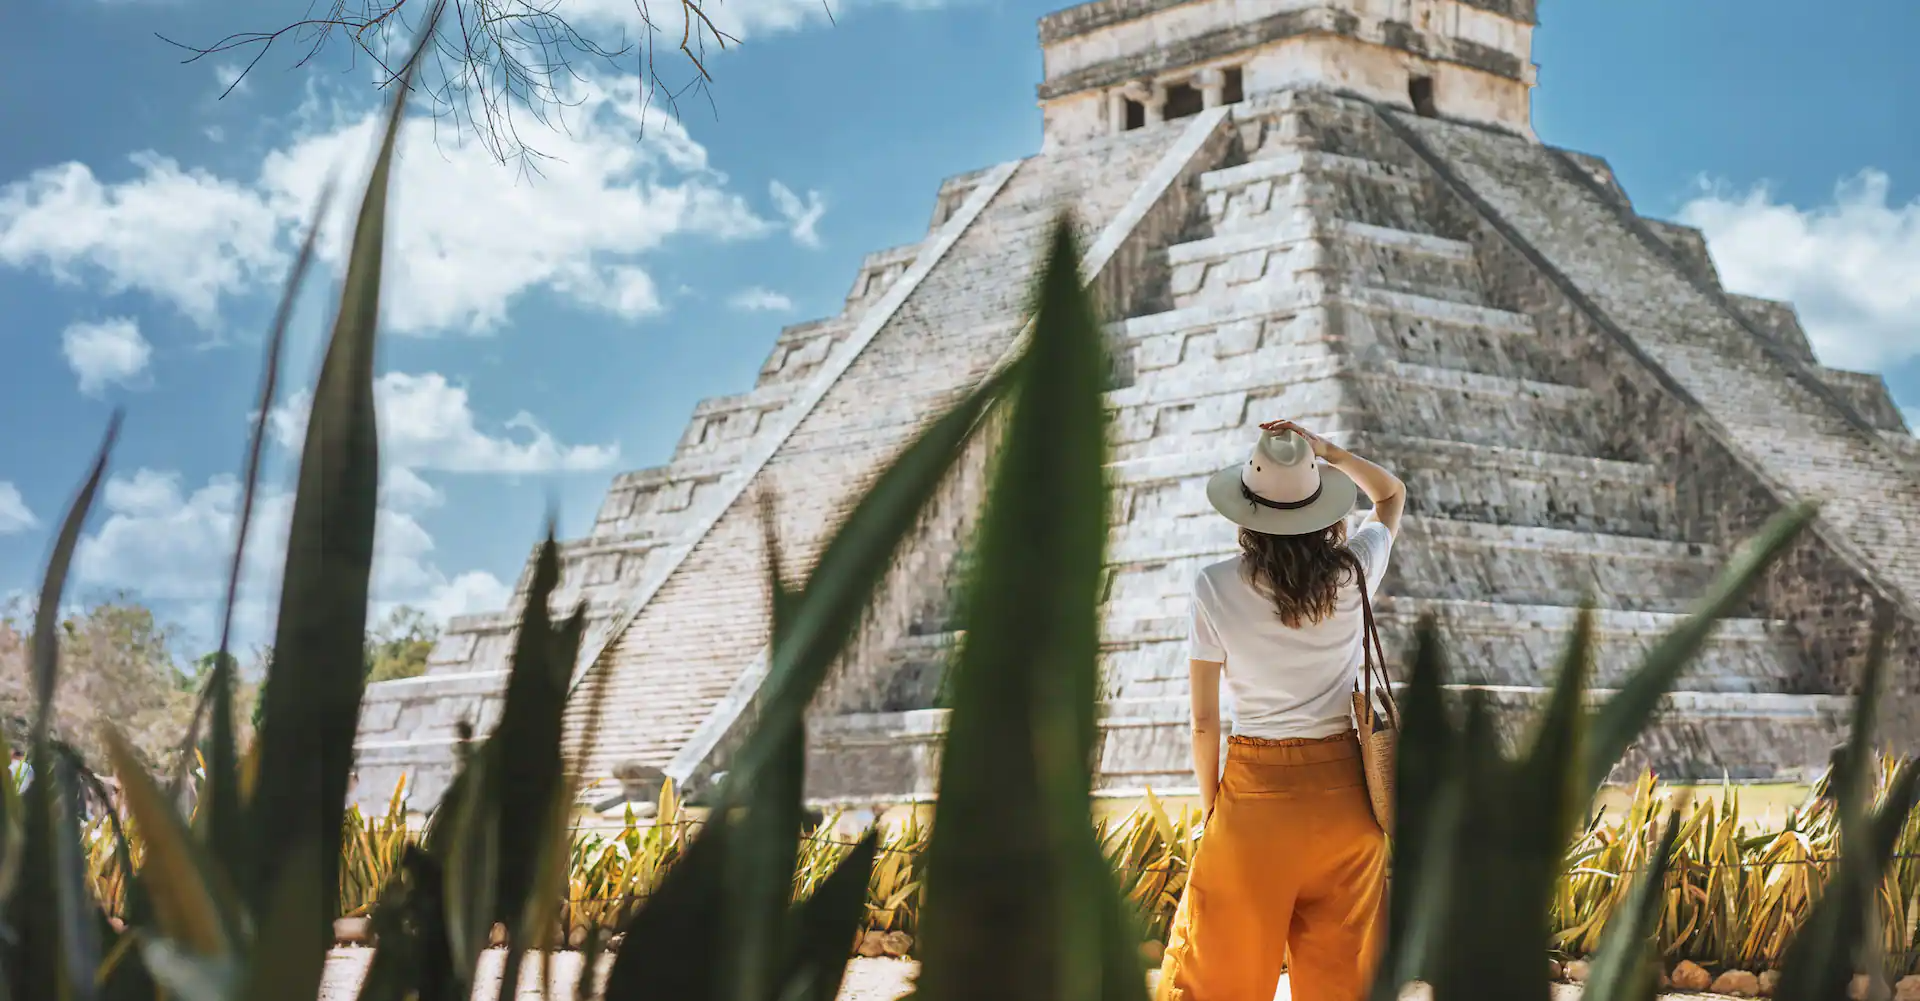 Connect with local culture and visit Chichén Itzá.